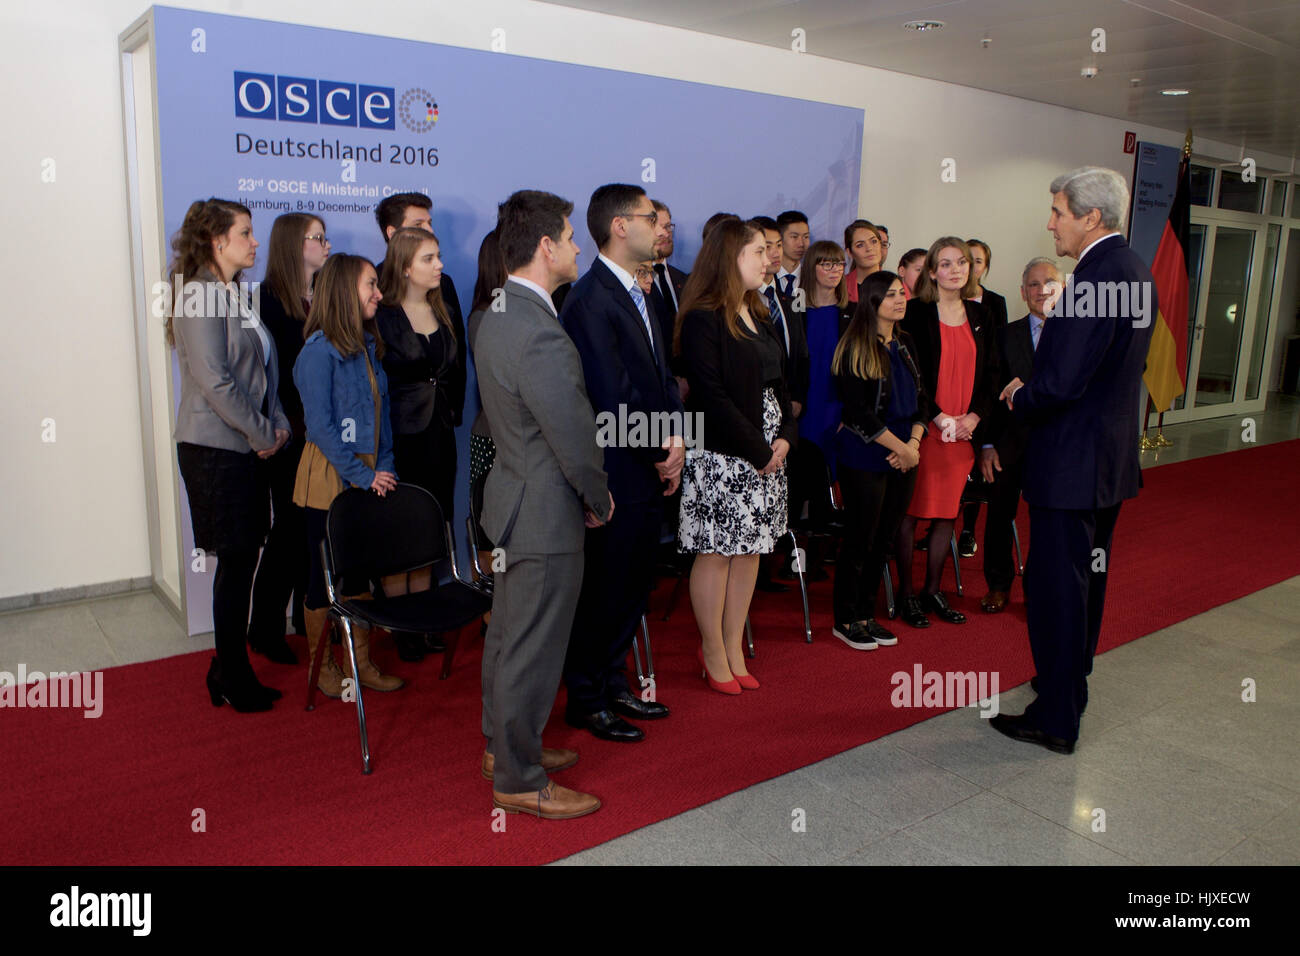 U.S. Secretary of State John Kerry speaks with a group of students who entered a peer competition about issues involving countering violent extremism as they attend a meeting of the Organization for Security and Co-operation in Europe hosted by German Foreign Minister Frank-Walter Steinmeier, and held at the Hamburg Messe in Hamburg, Germany, on December 8, 2016. Stock Photo